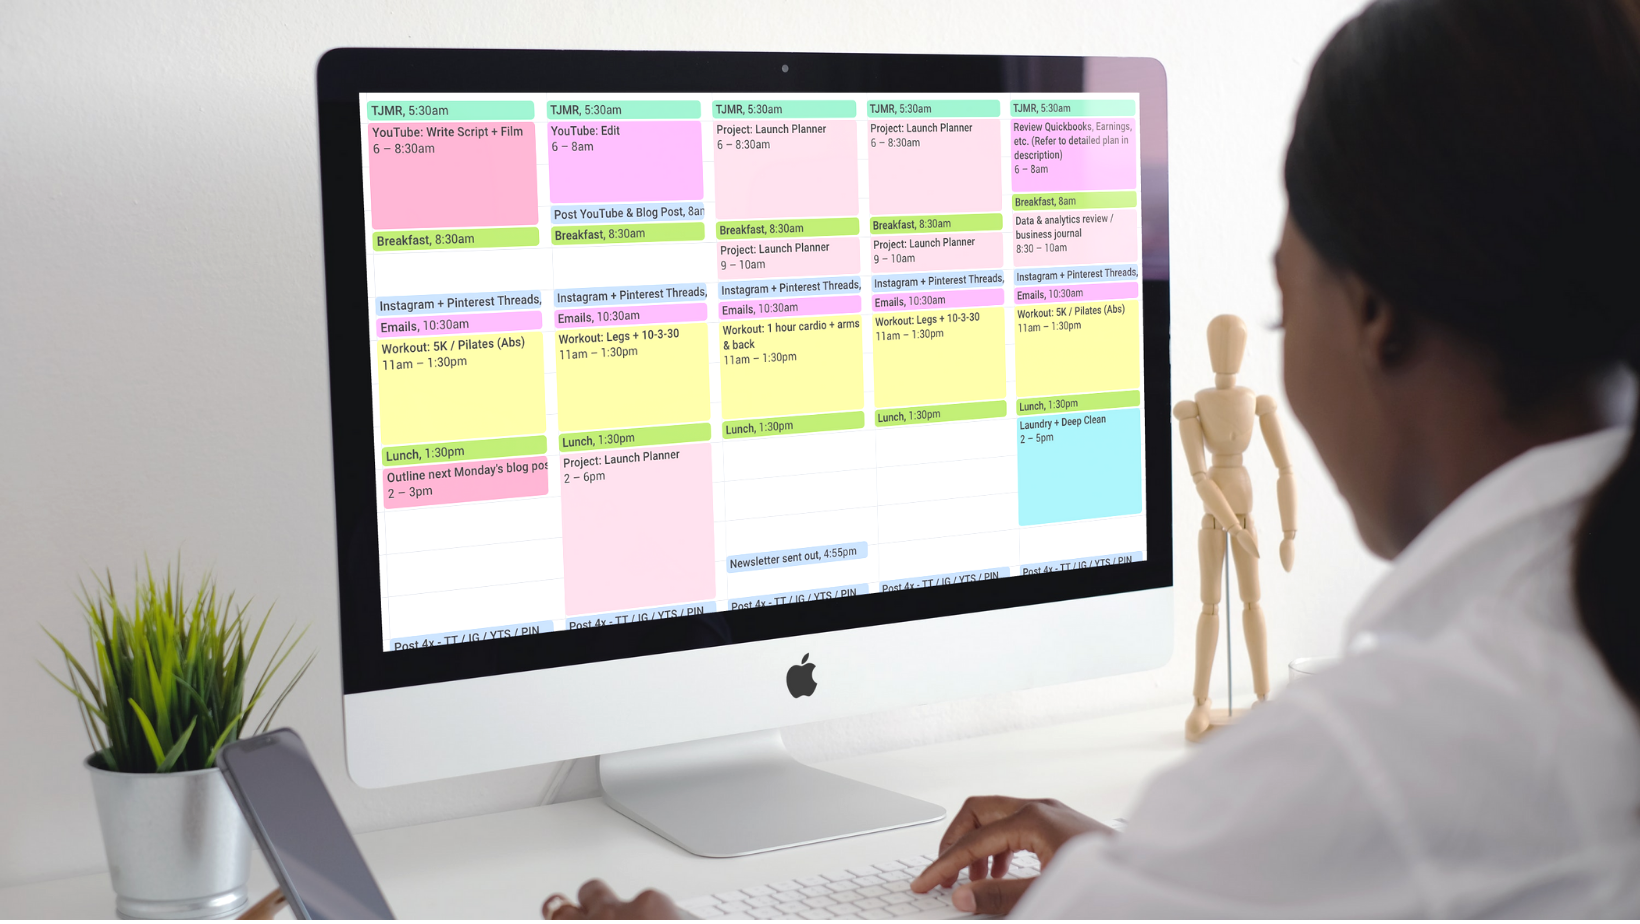 How to plan your week - schedule and organize your calendar